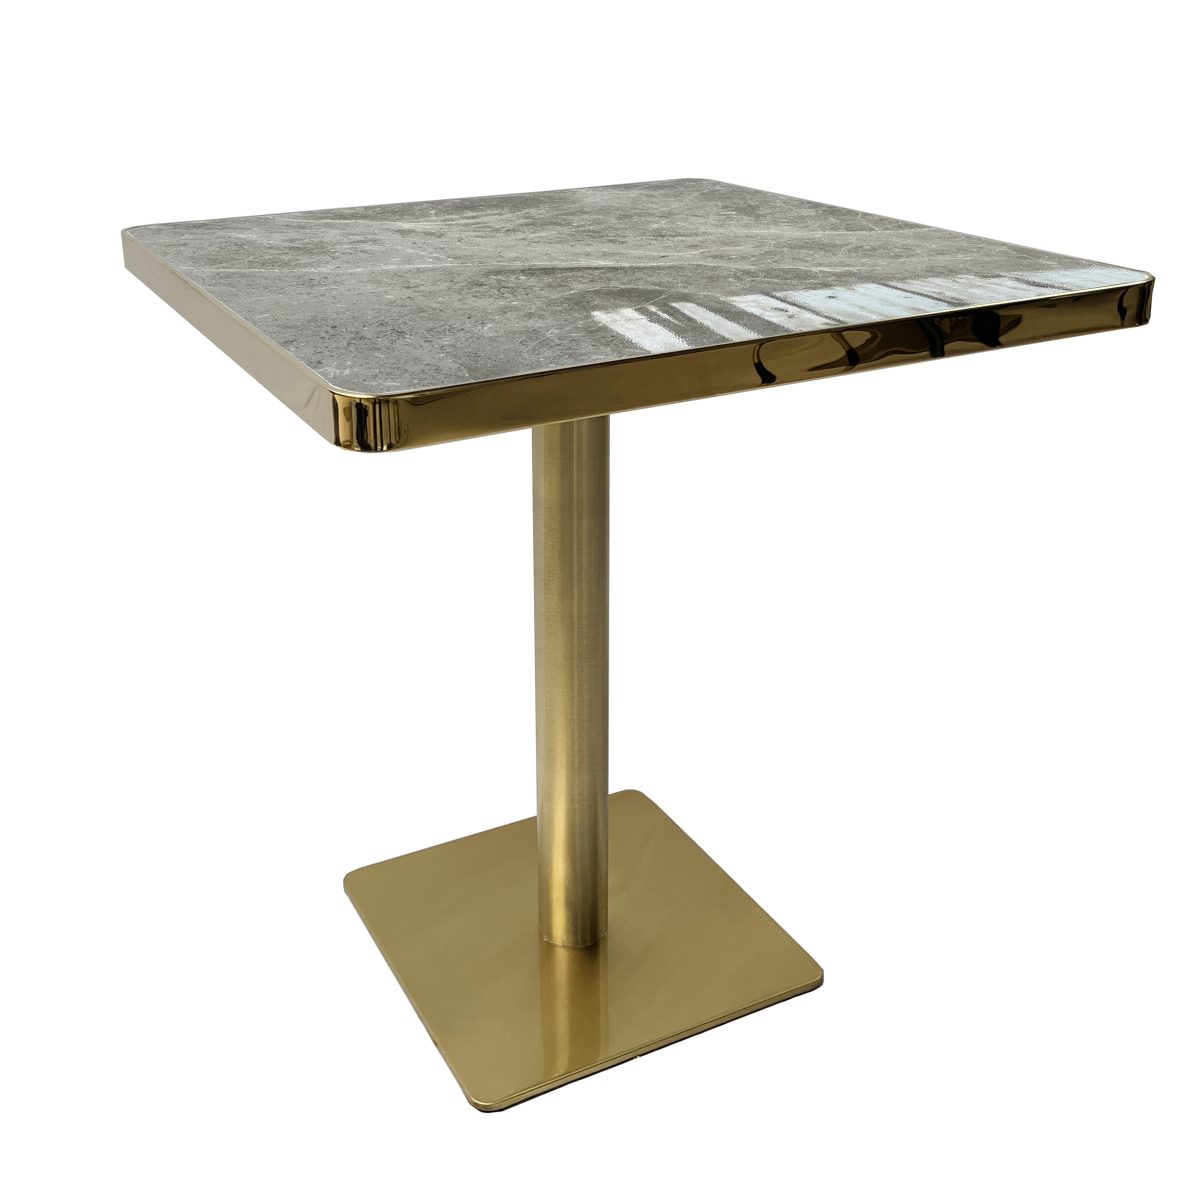 Marble table with gold base